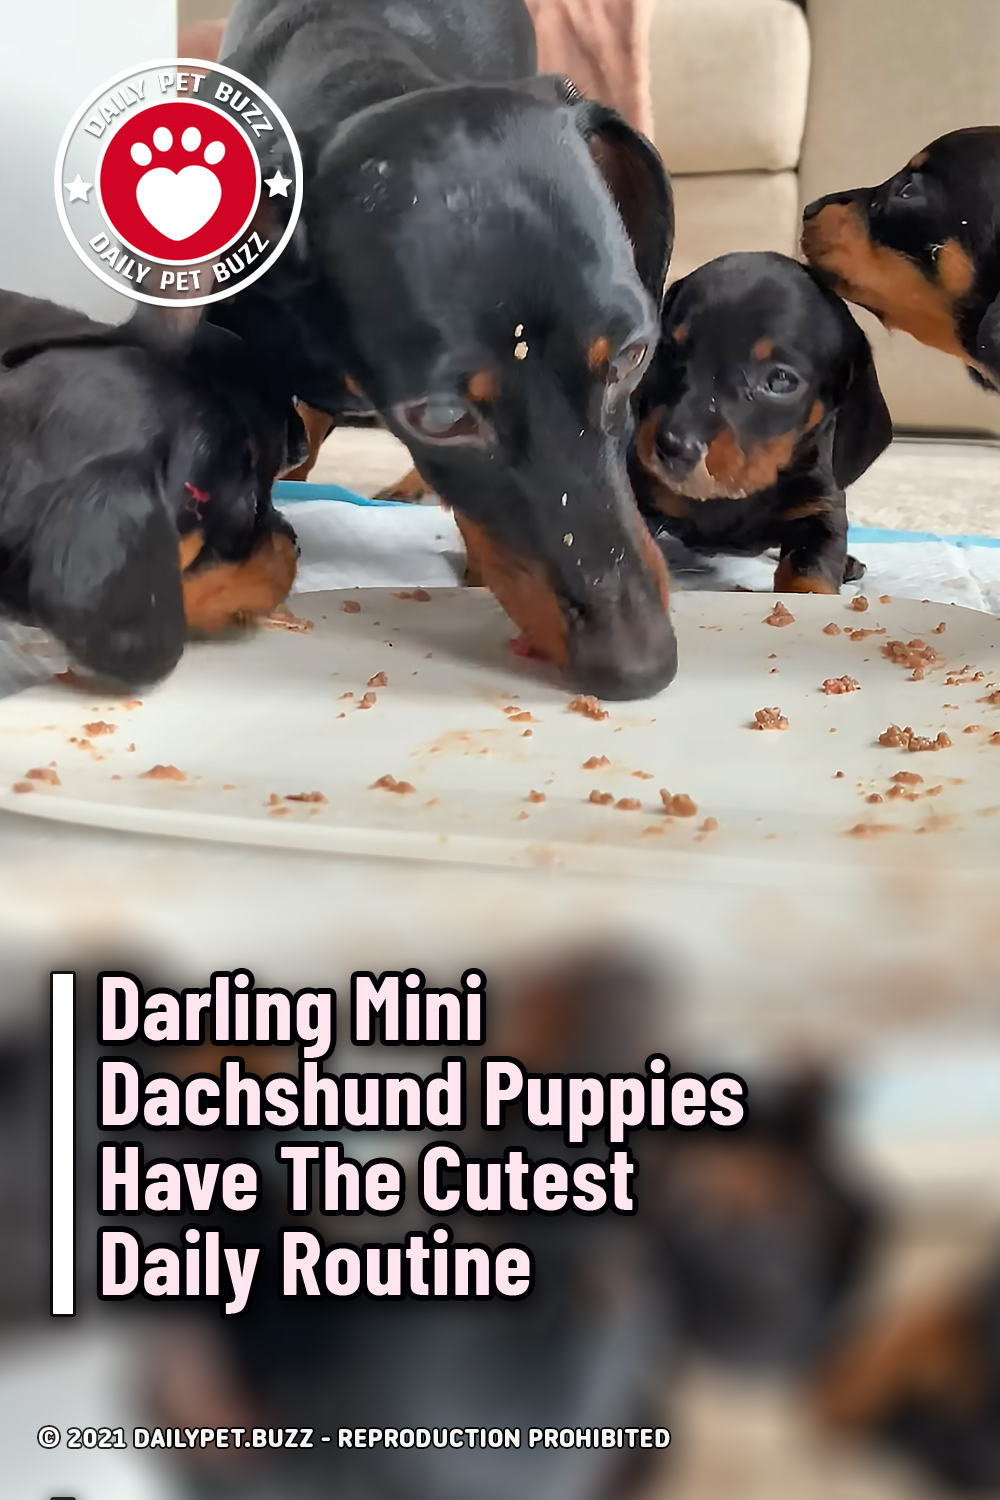 Darling Mini Dachshund Puppies Have The Cutest Daily Routine